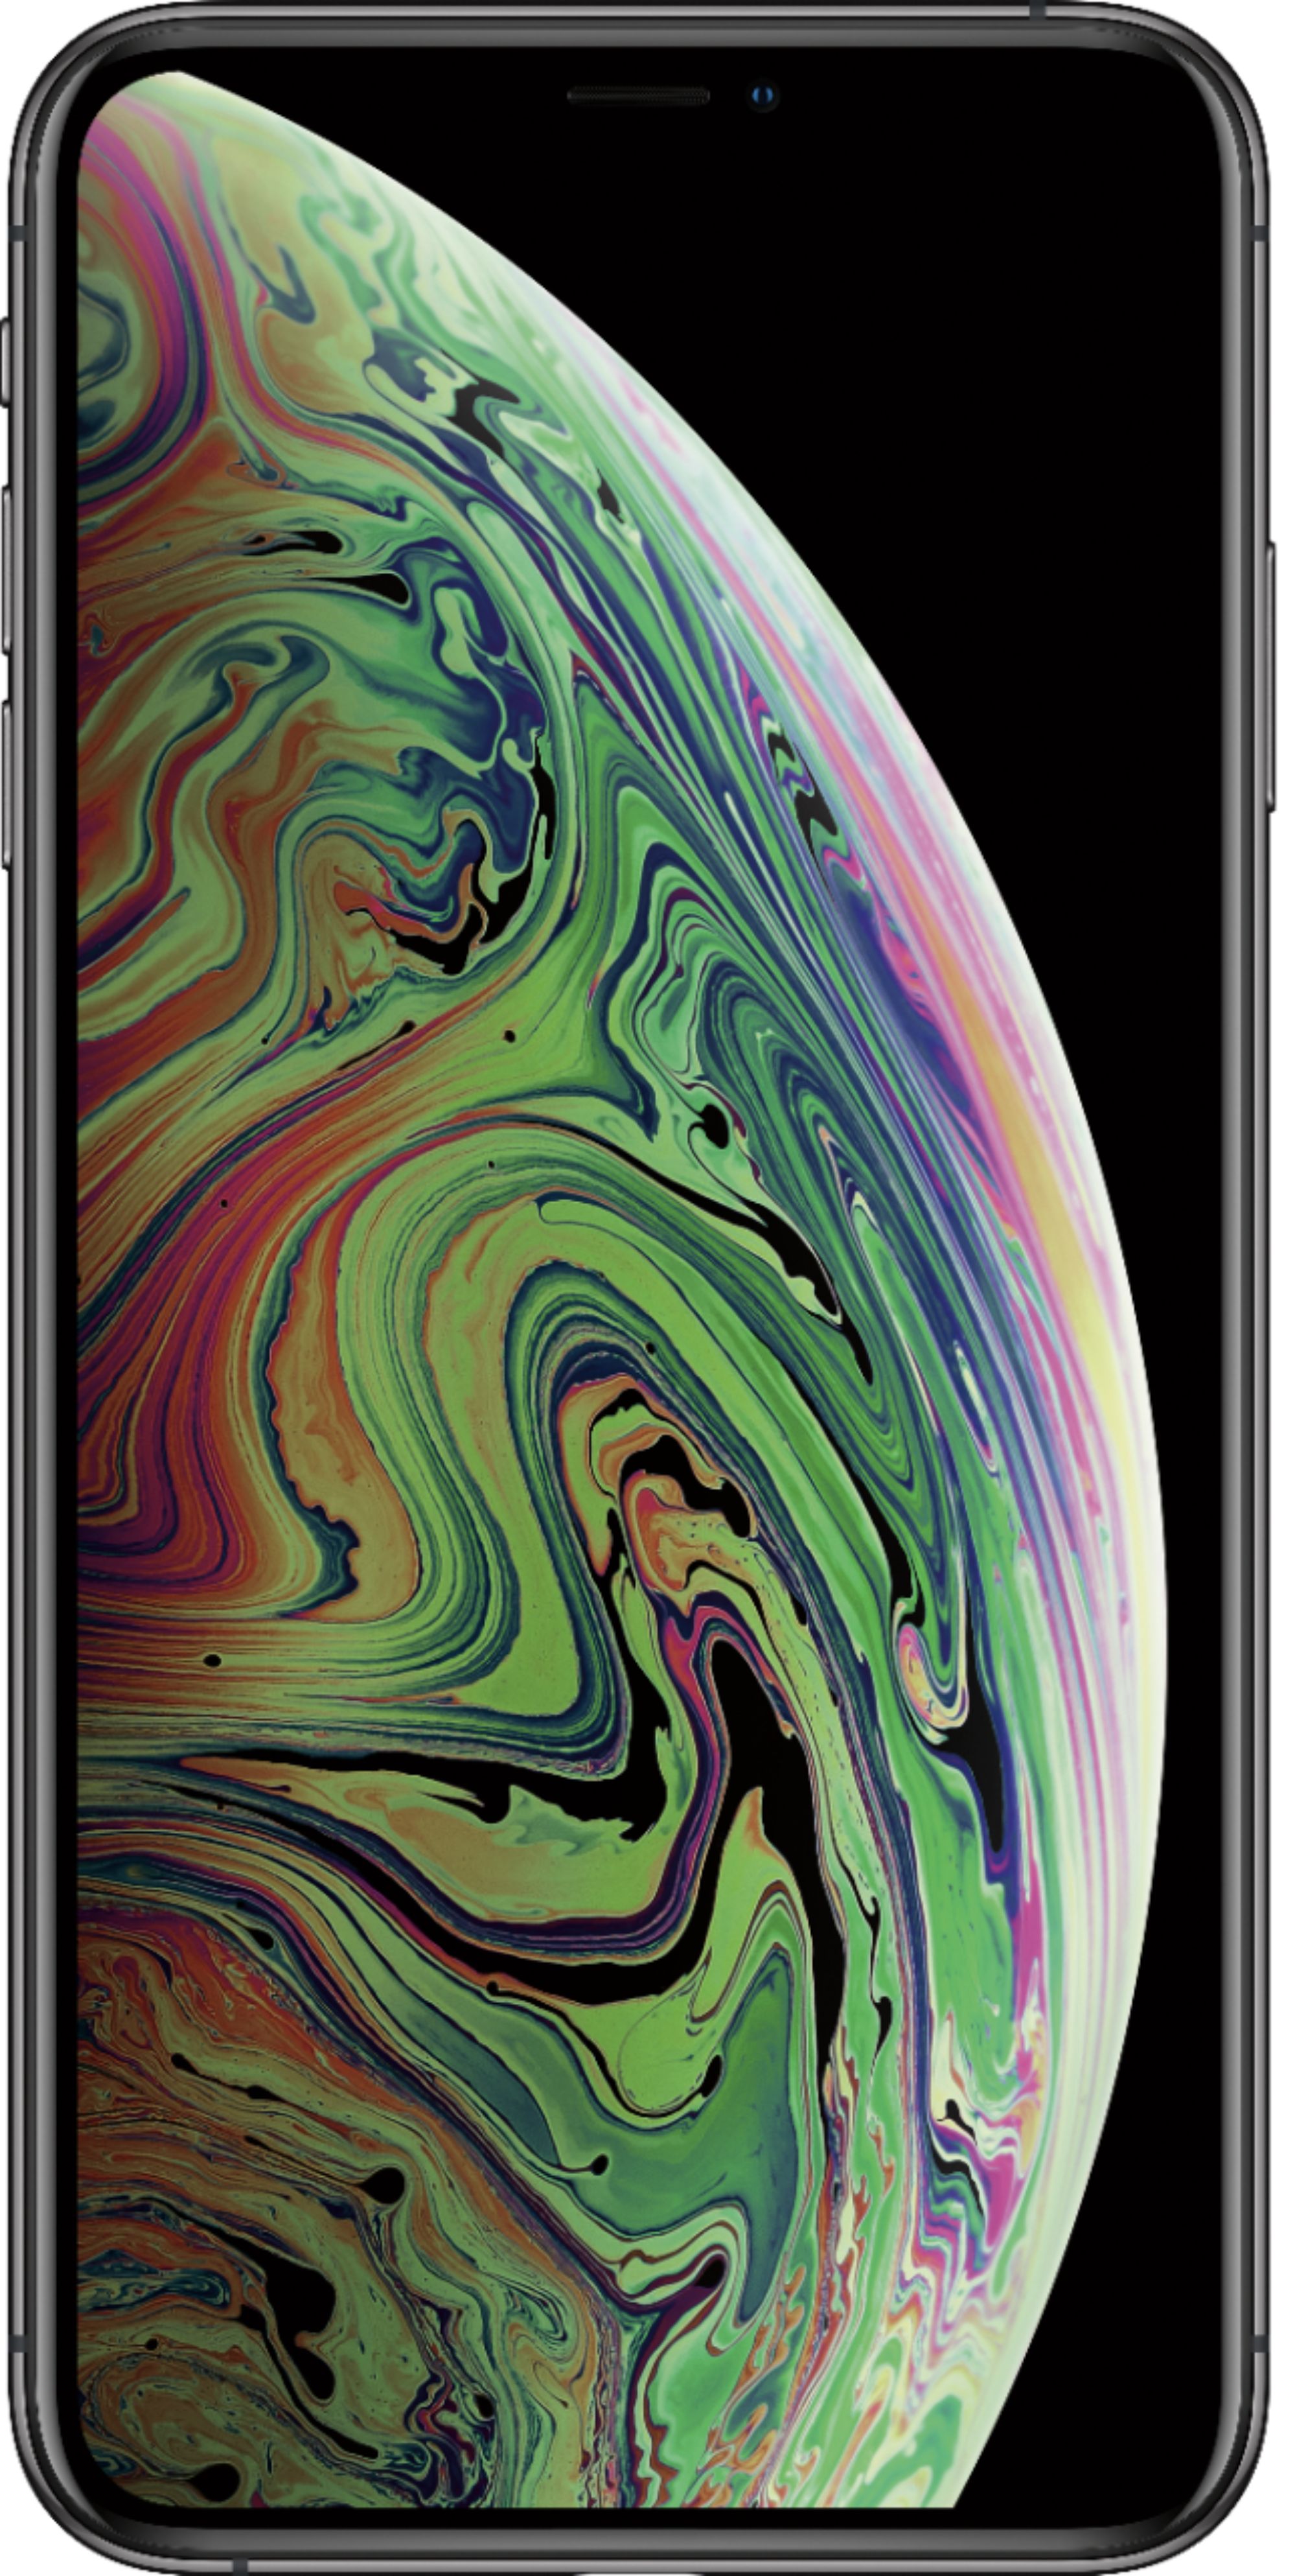 Apple iPhone XS Max 256GB Space Gray (AT&T - Best Buy